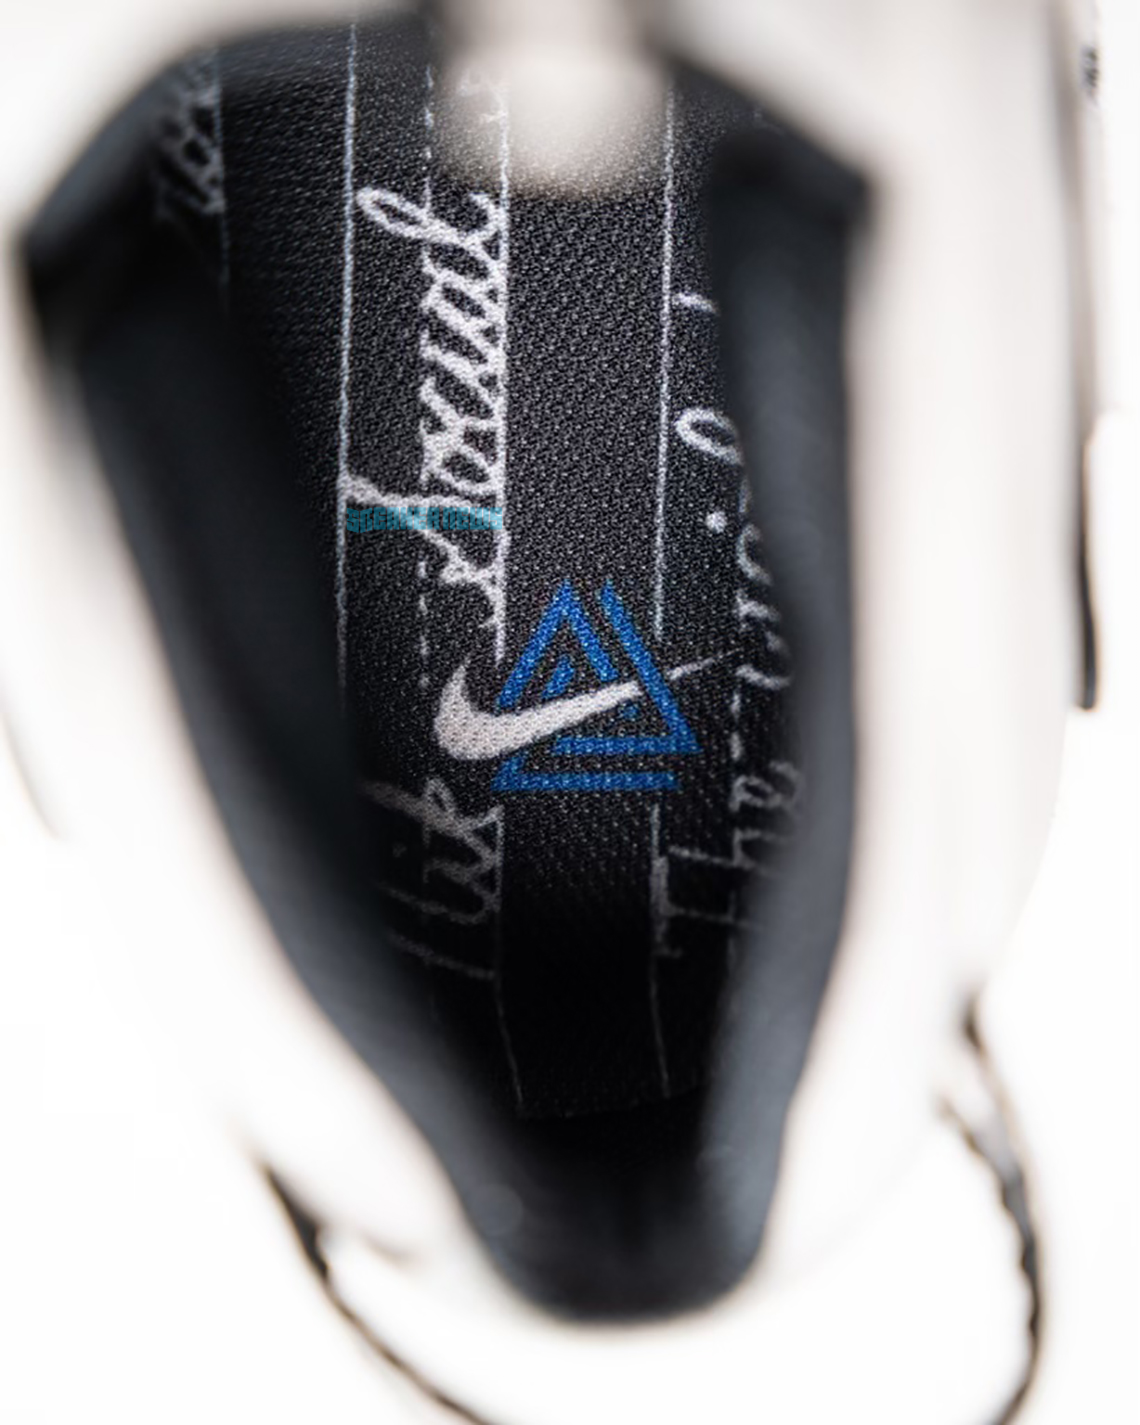 Social Status the Nike Flywire makes a Release Date 2